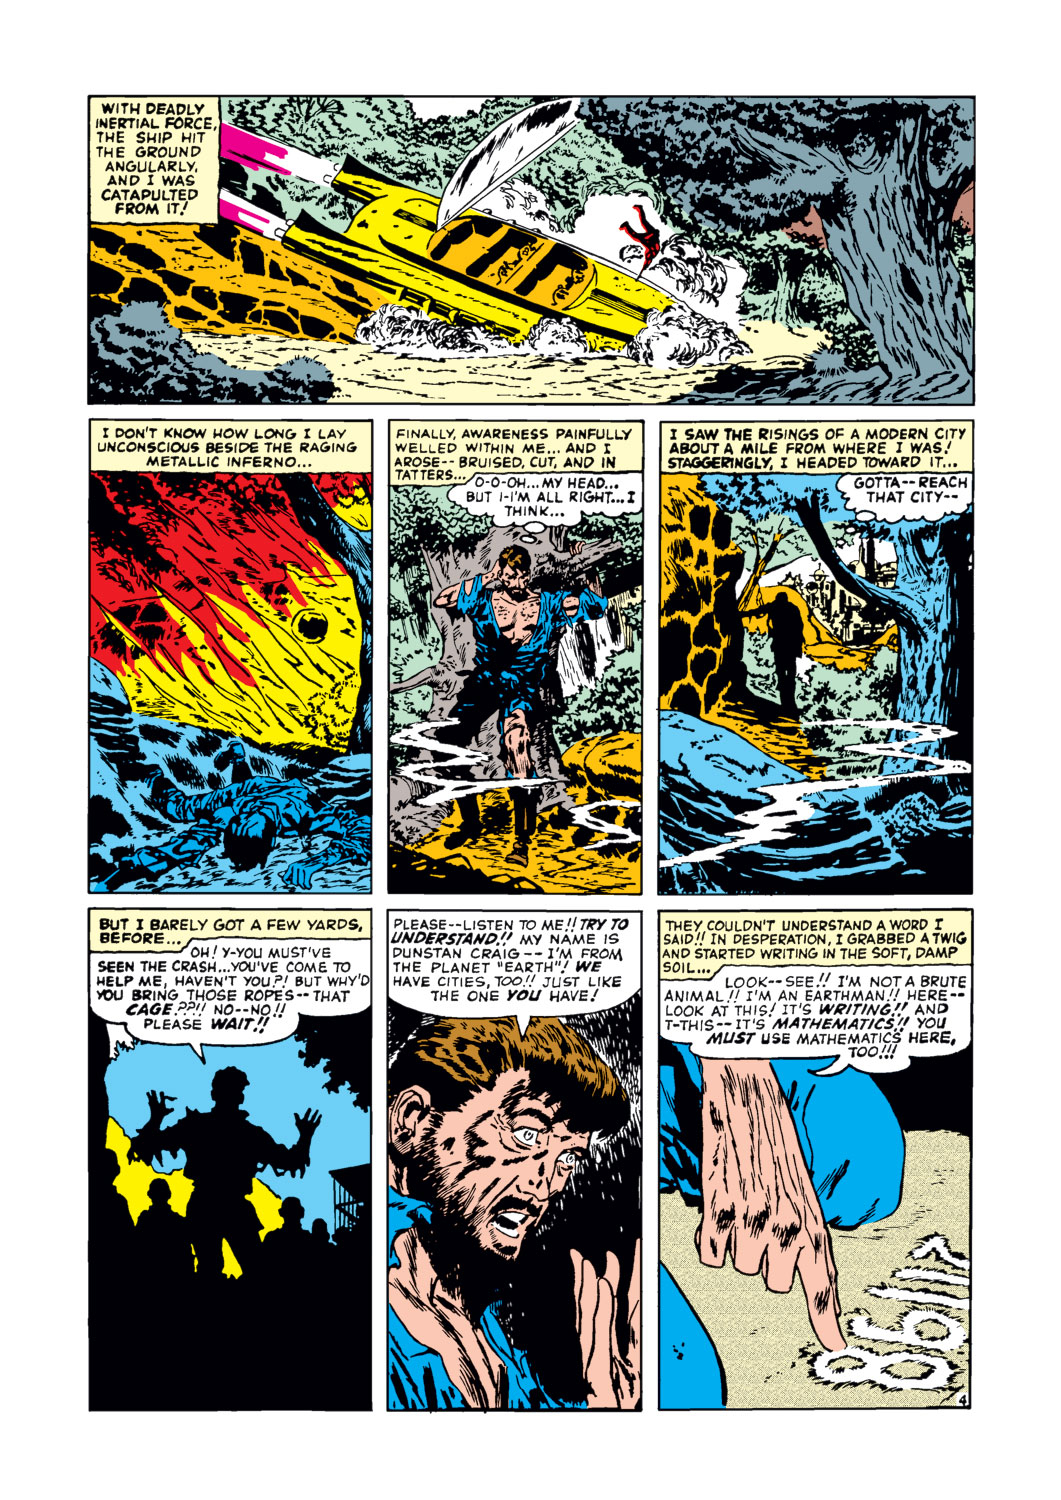 Tales to Astonish (1959) 2 Page 4